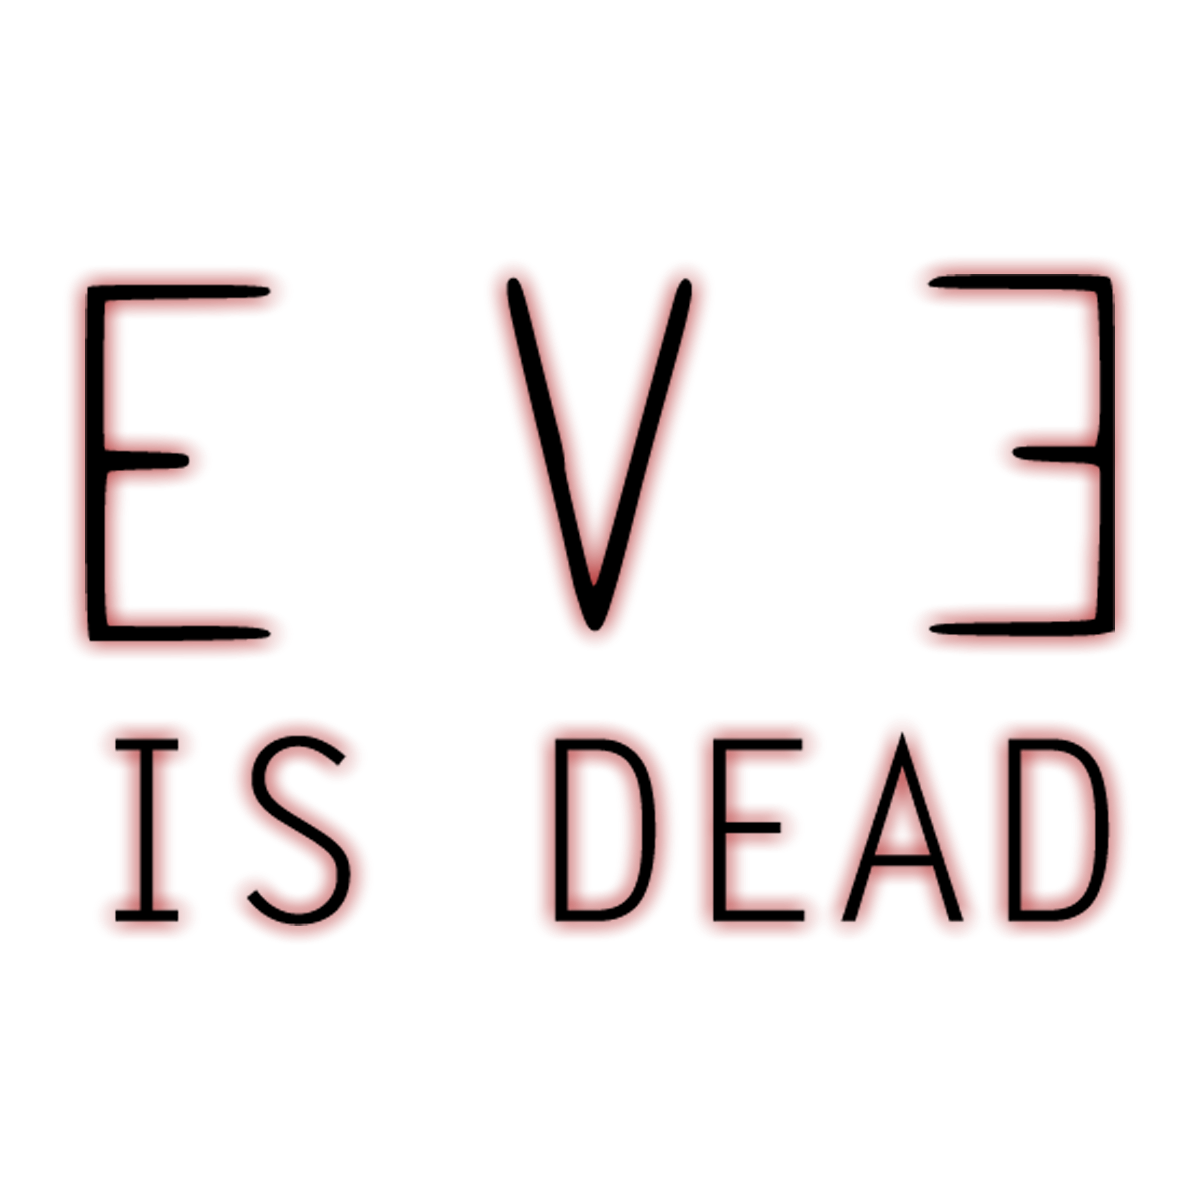 EVE Is Dead